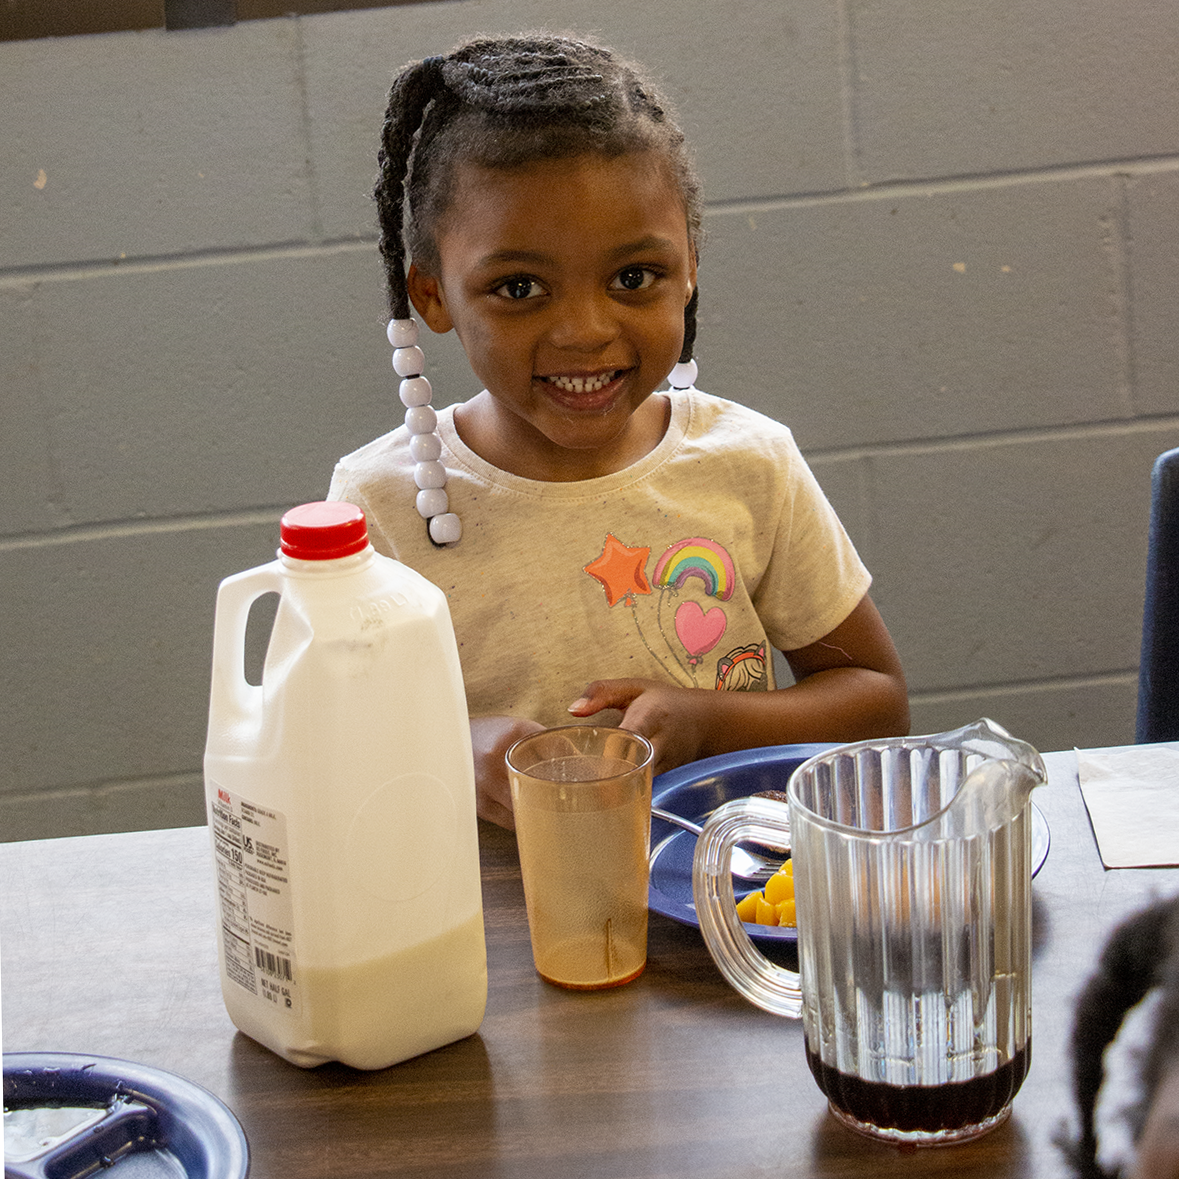 A child eats lunch at the Child Development Center